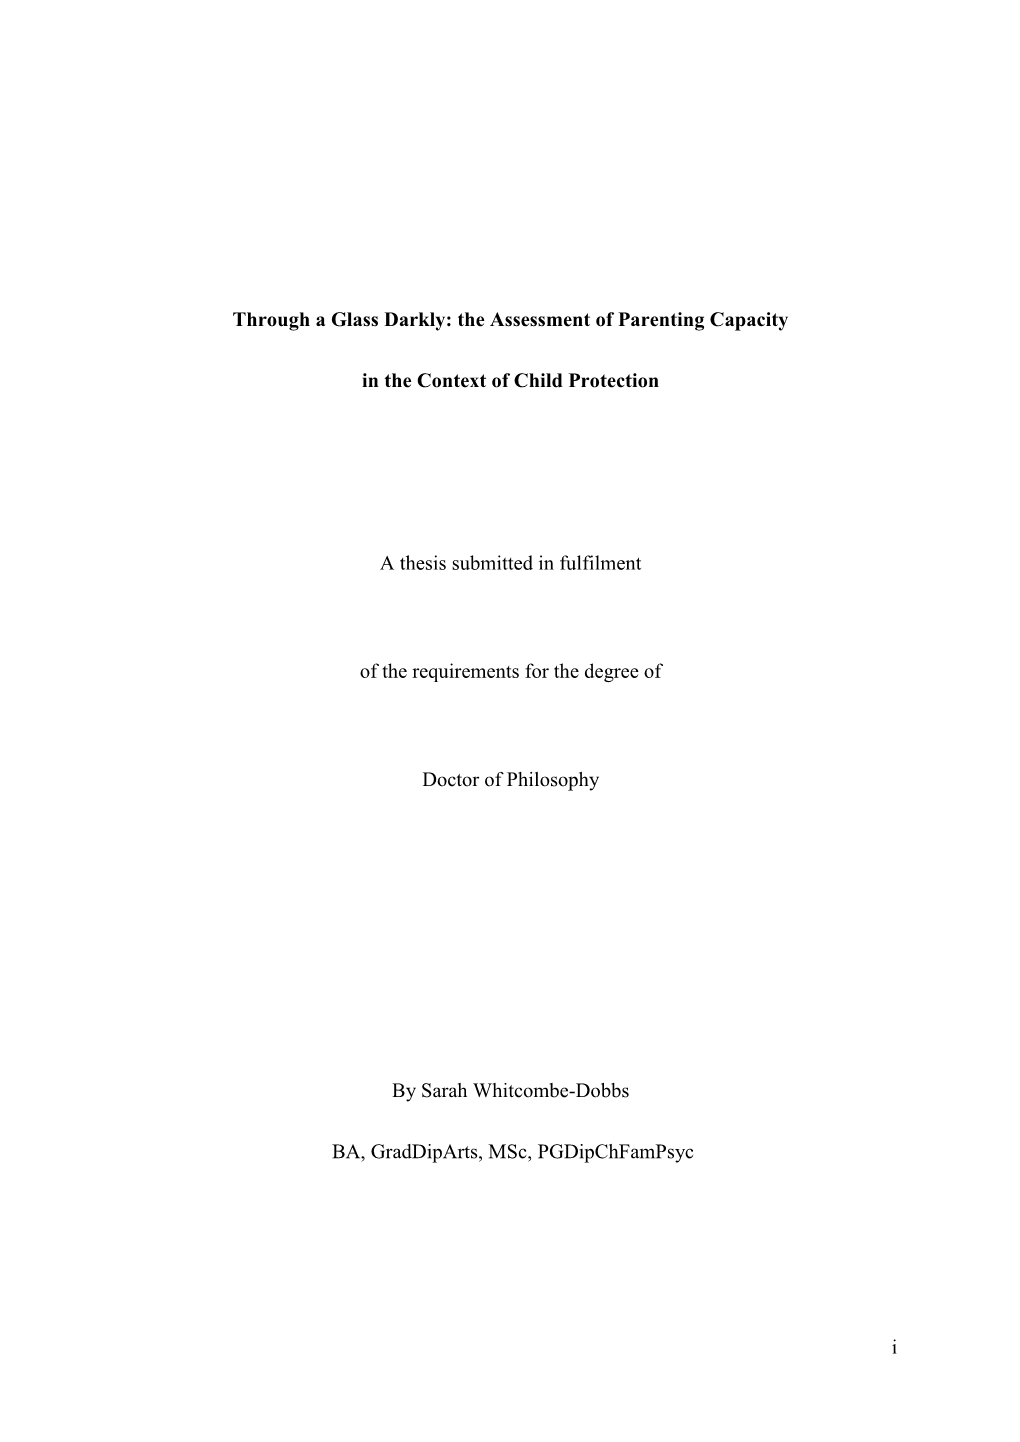 The Assessment of Parenting Capacity in the Context of Child Protection A